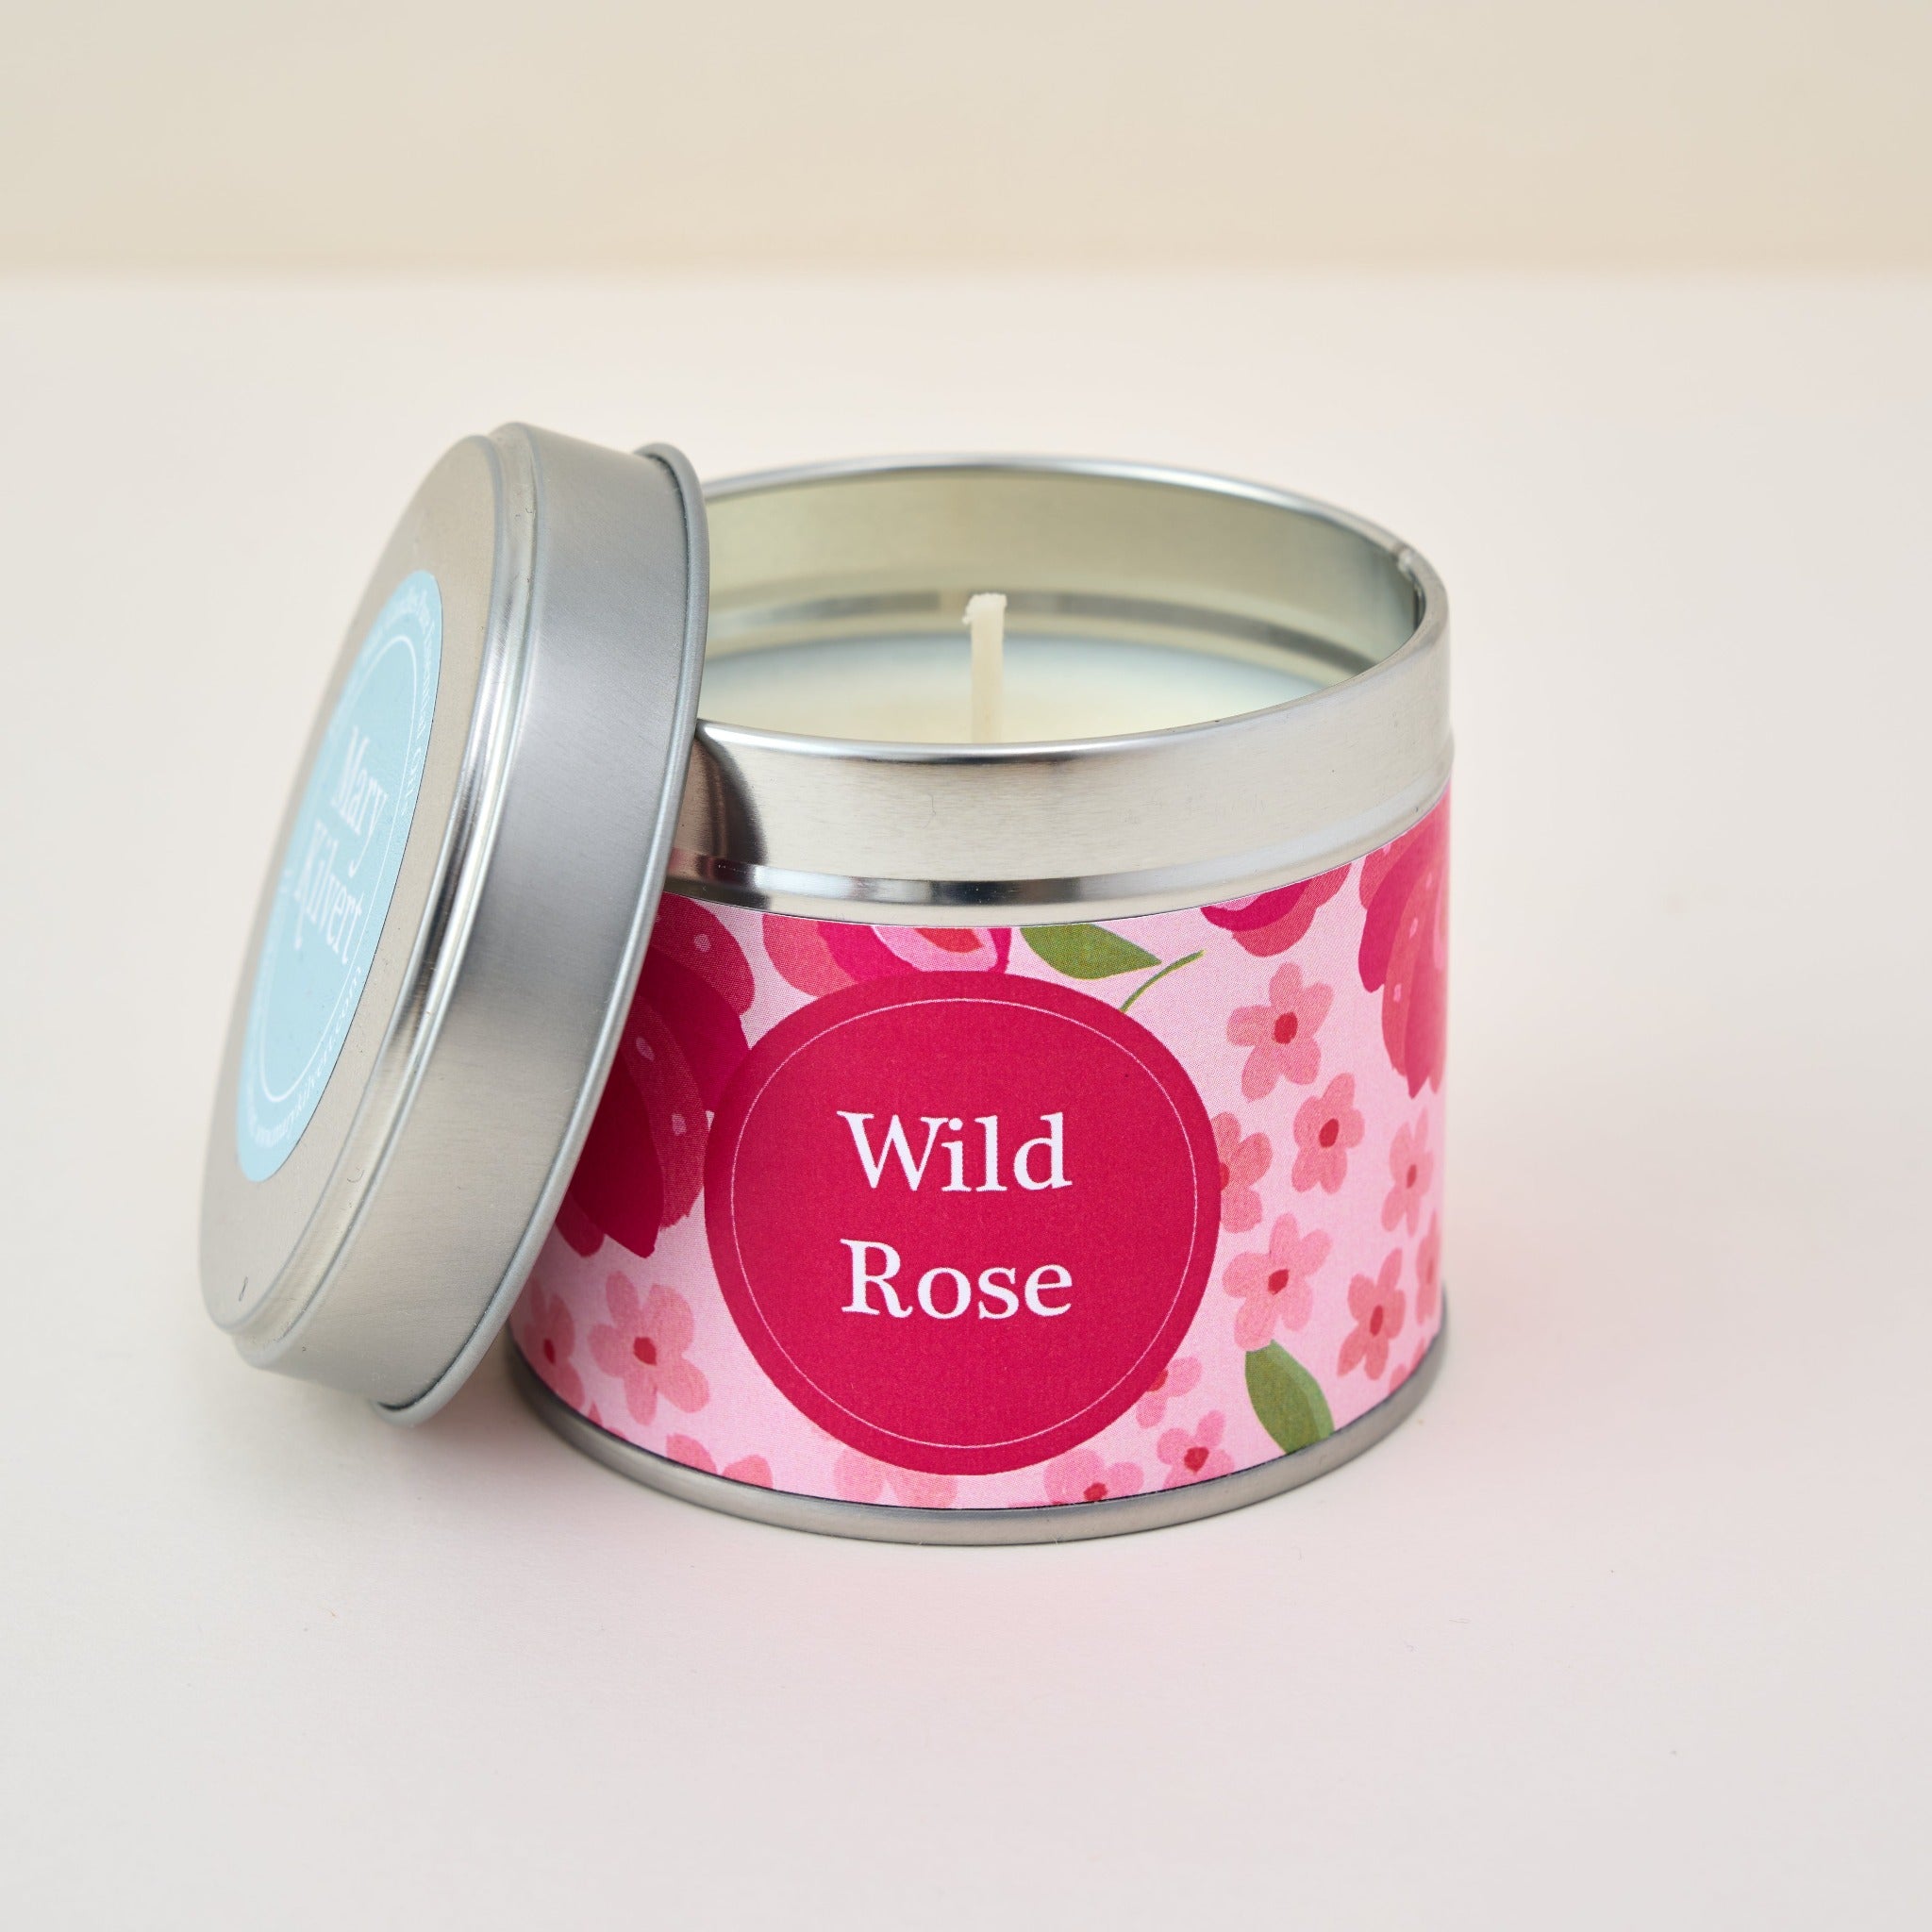 Wild Rose Candle by Mary Kilvert